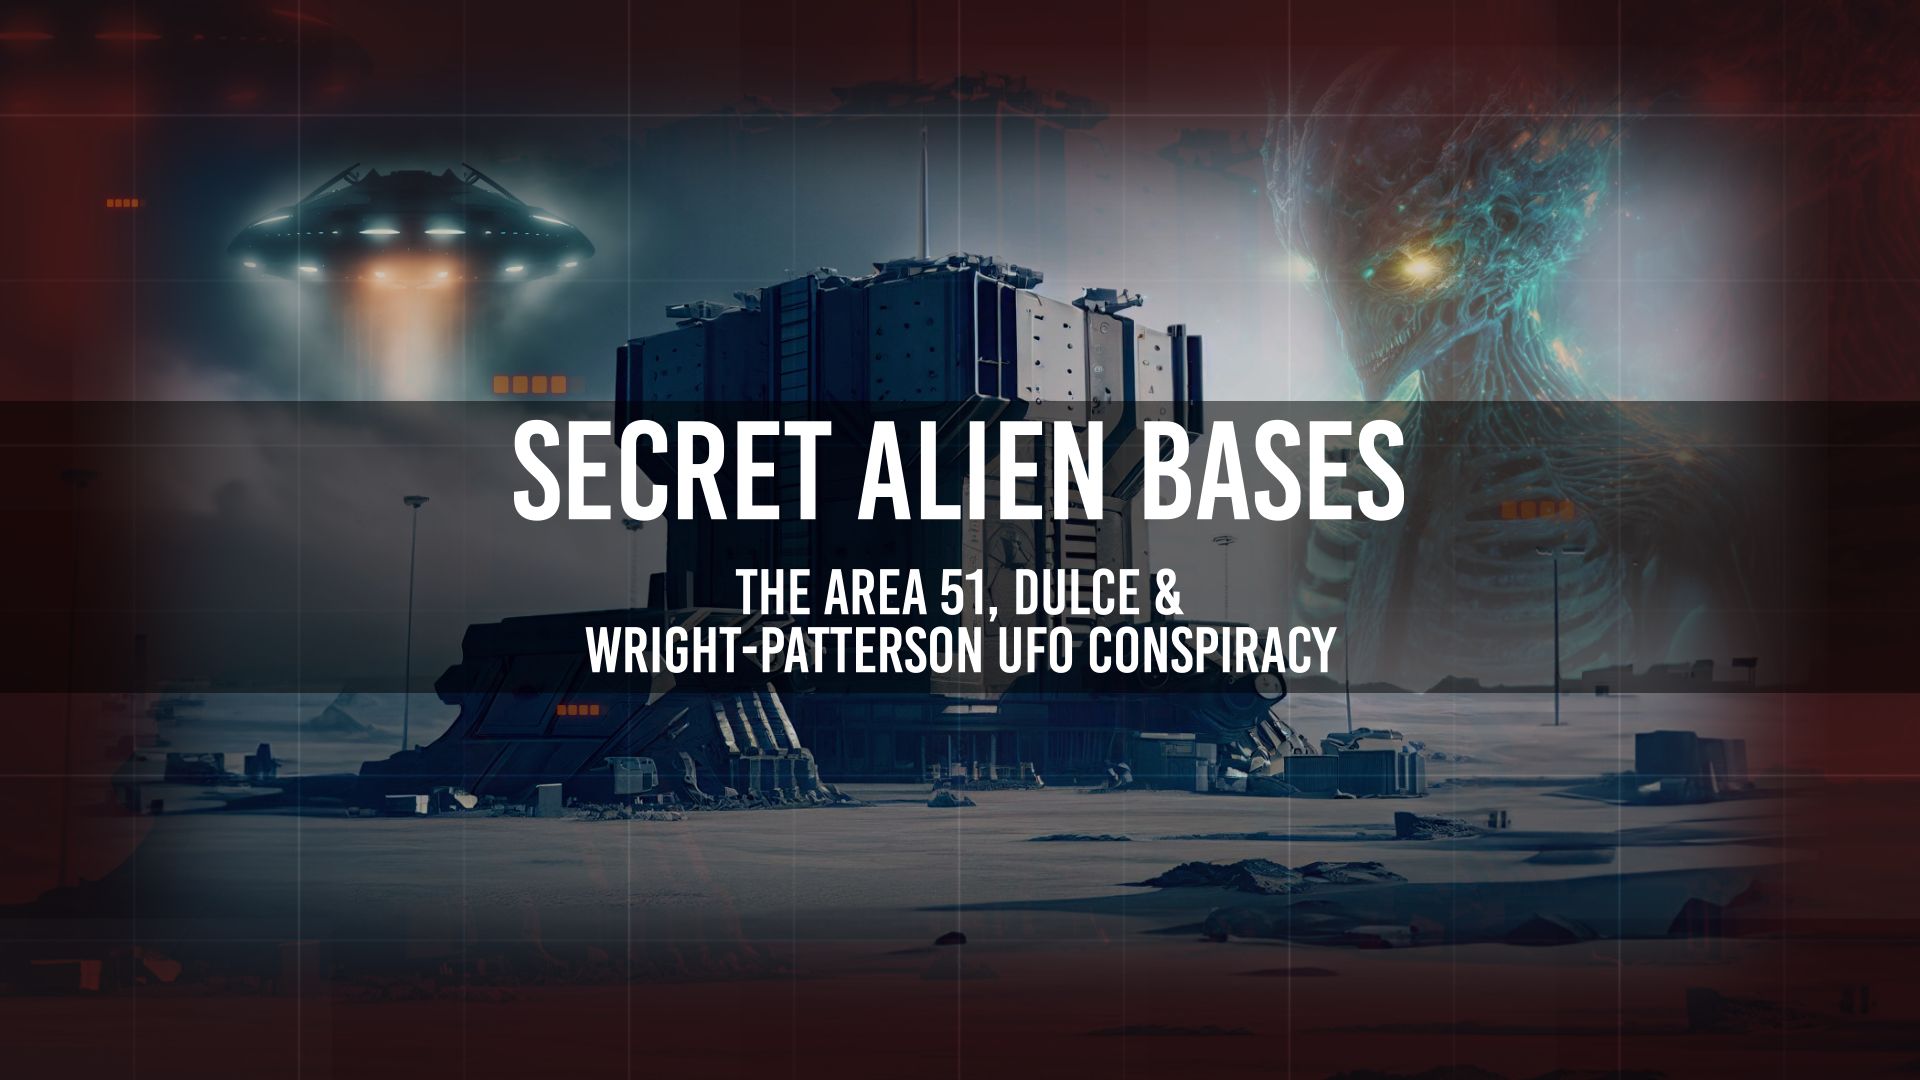 Secret Alien Bases: The Area 51, Dulce, and Wright-Patterson UFO Conspiracy